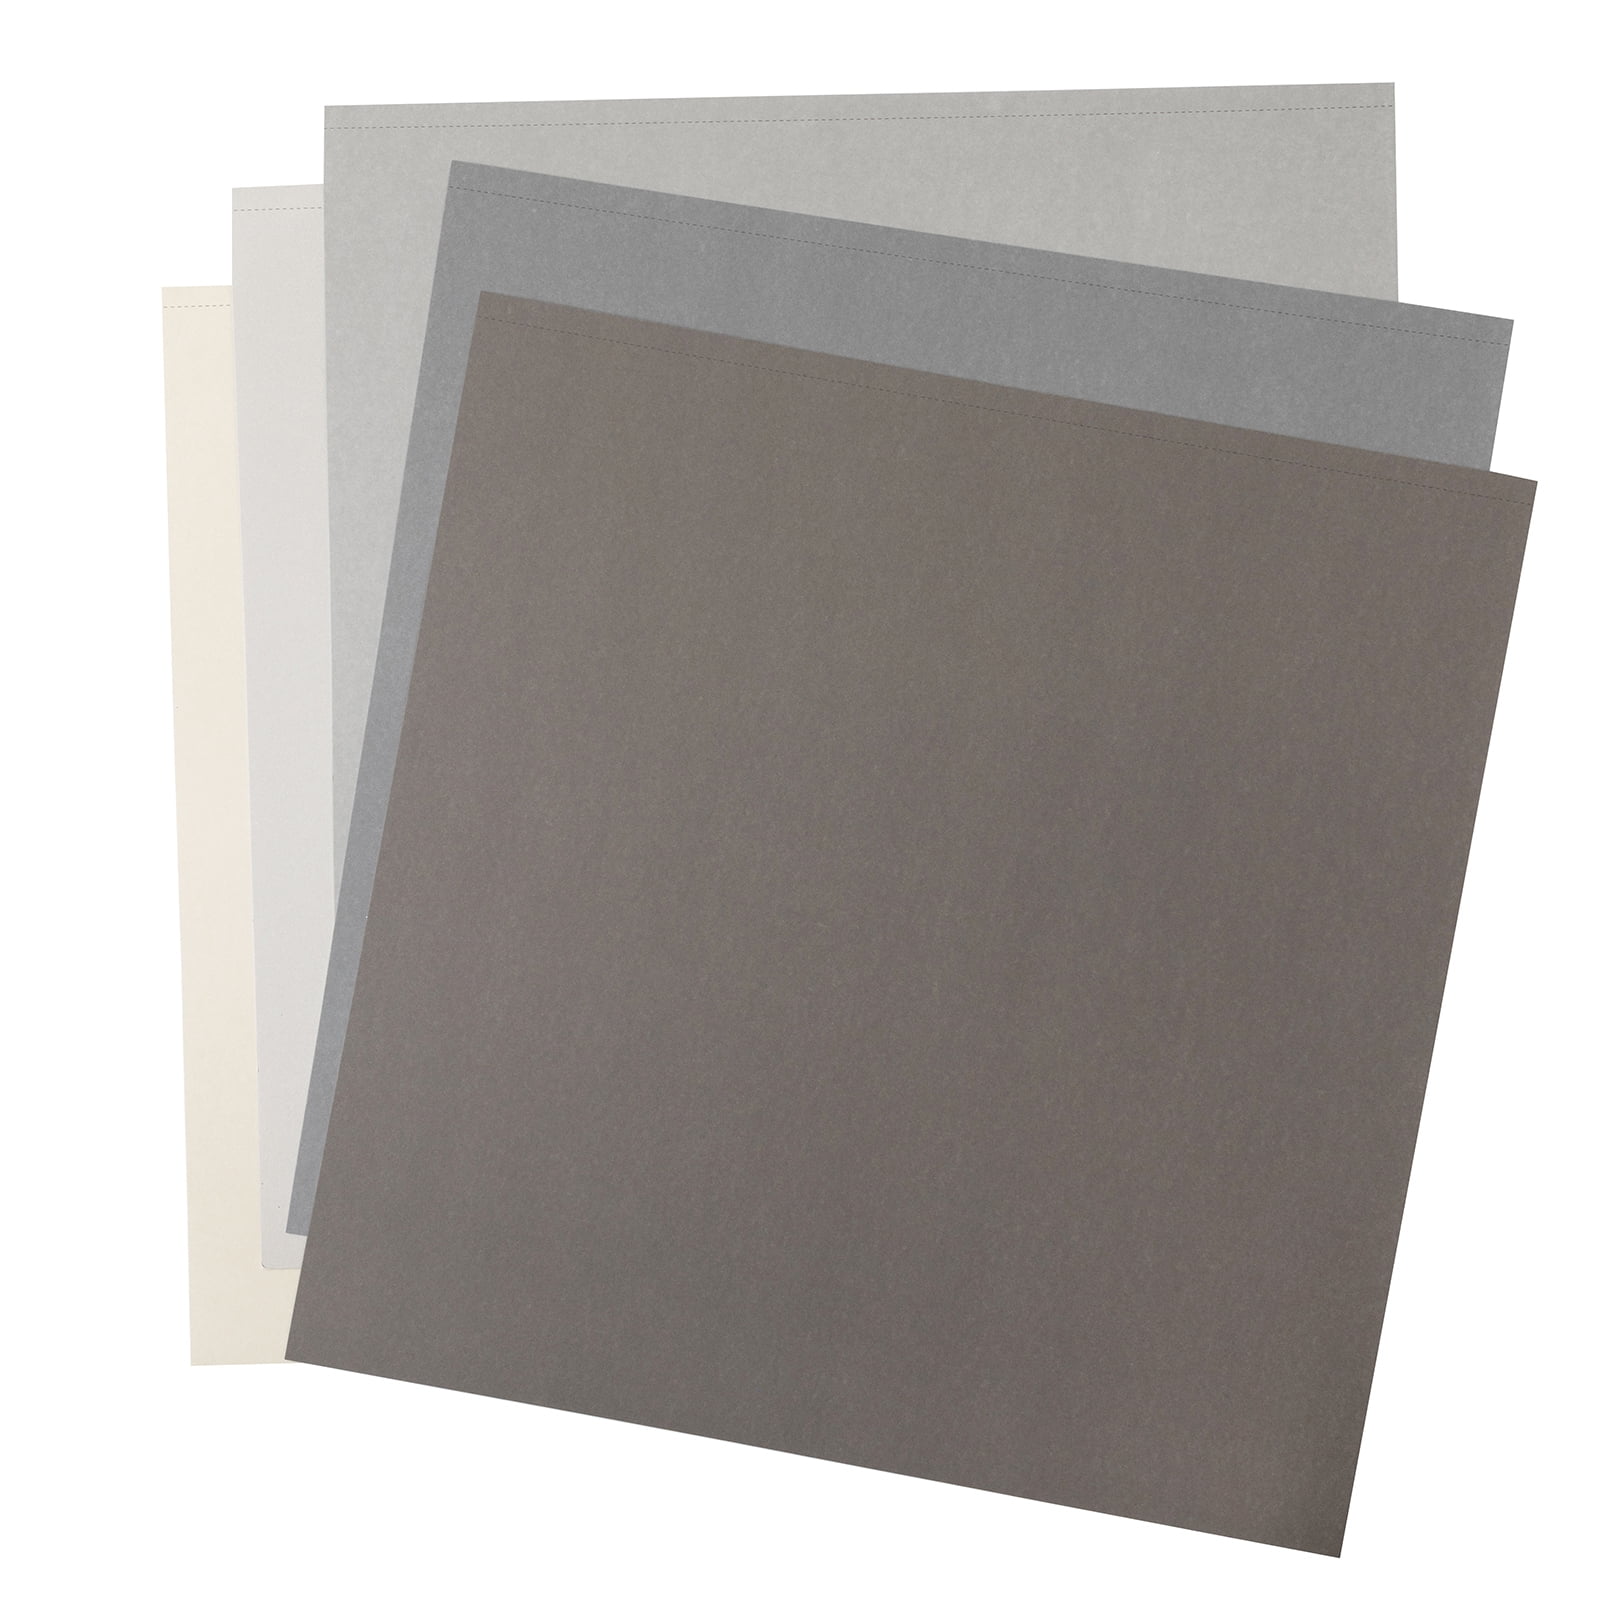 Colorbok Snow White Textured Cardstock, 12”x12”, 121 lb./180 gsm, 30 Sheets  